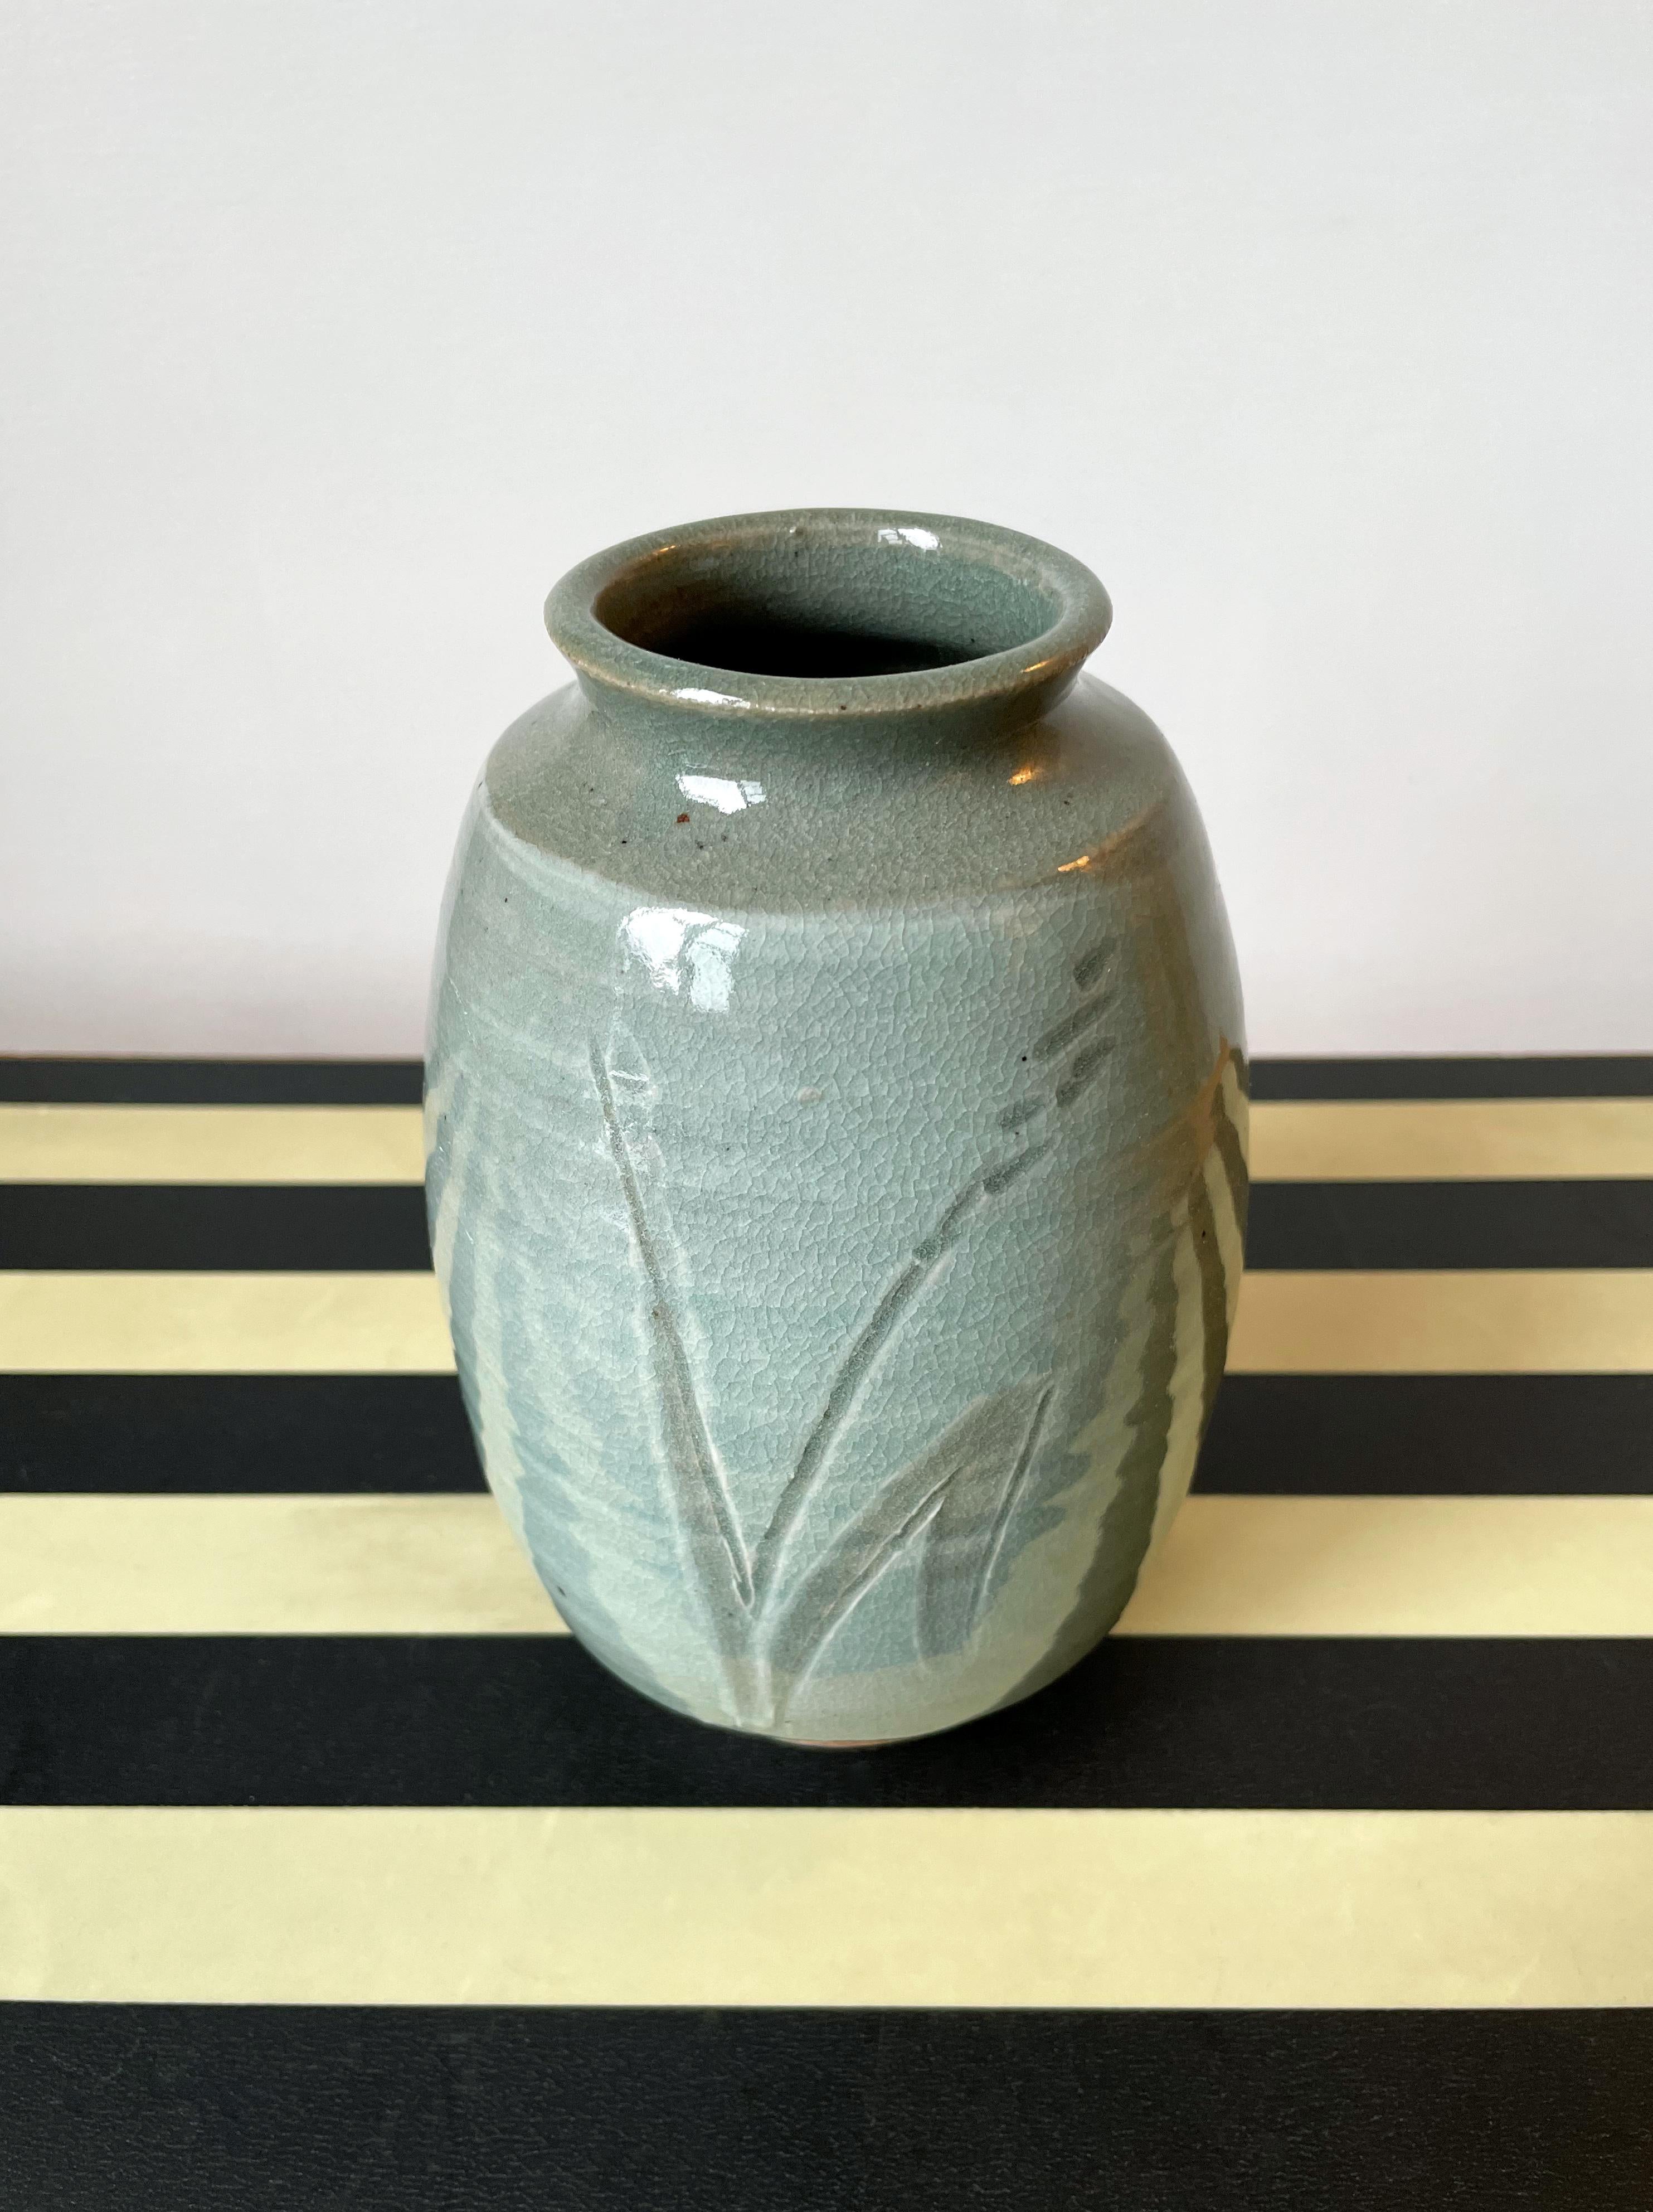 Heavy sage green Mid-Century Modern barrel shaped ceramic vase with handmade incised organic floral decor. Stamp under base. In great vintage condition consistent with age and wear. 
Scandinavia, 1950s.